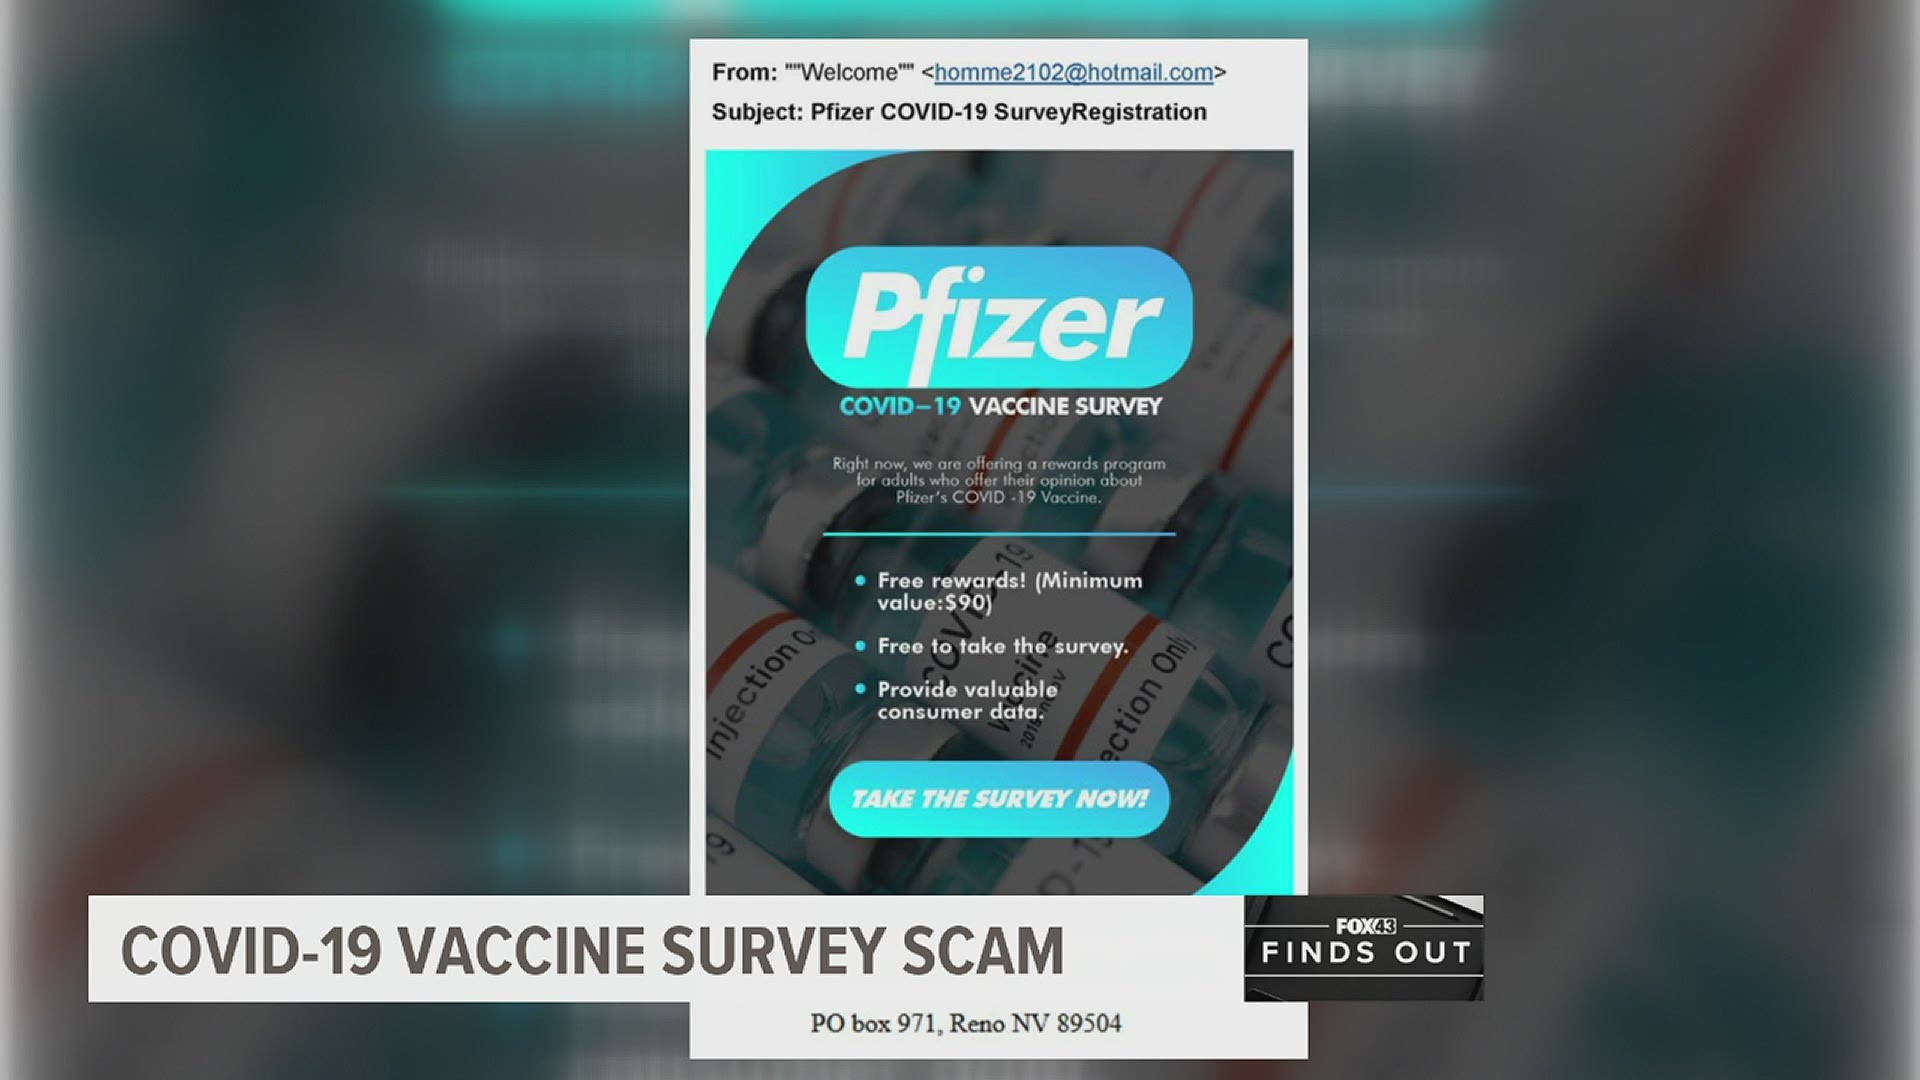 People across the country are getting emails and text messages asking them to fill out a COVID-19 vaccine survey to get free rewards. FOX43 Finds Out it's a scam.